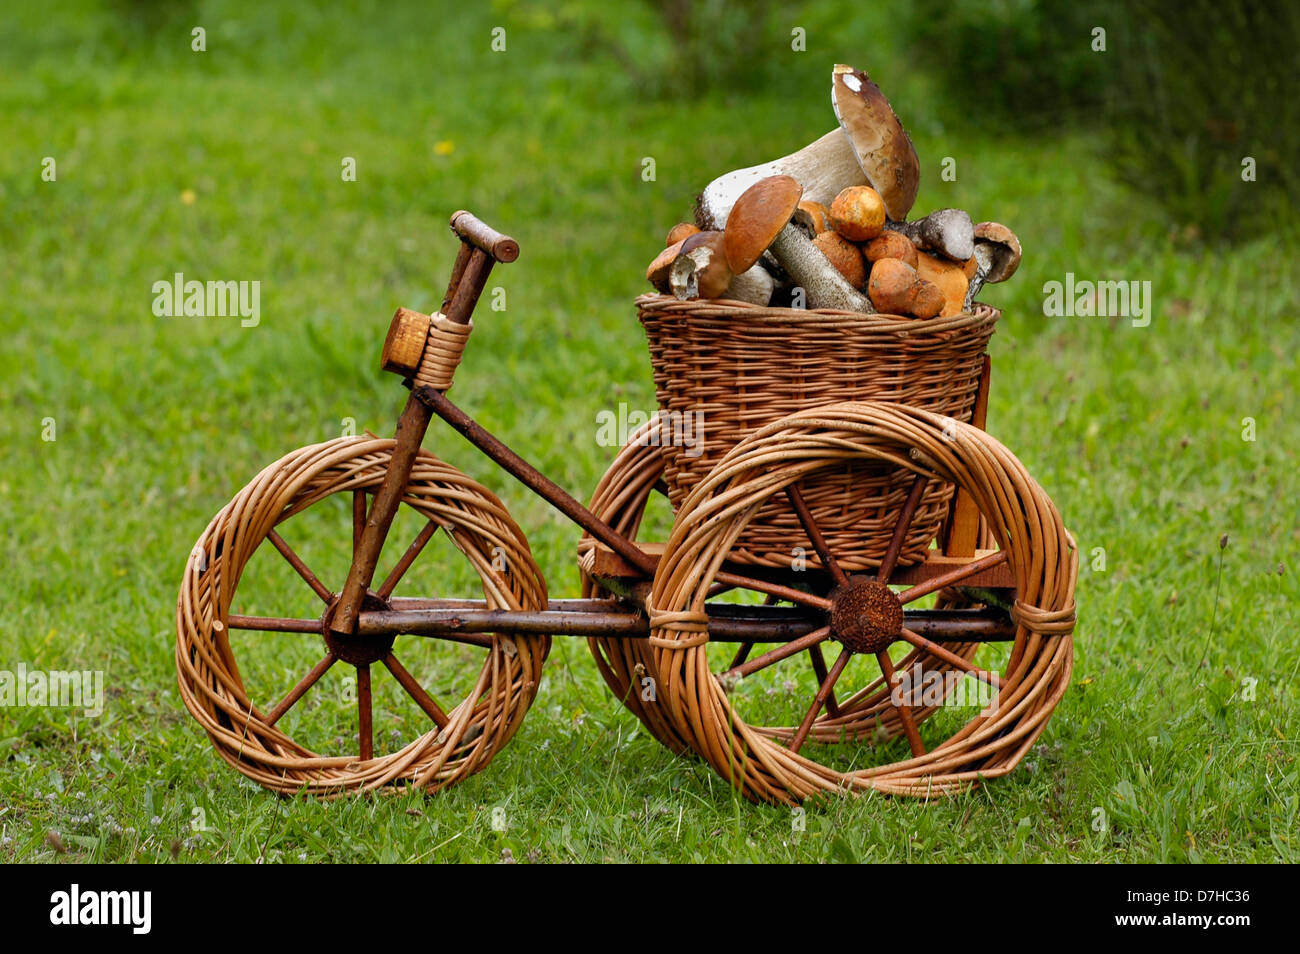 Basket filled with King Boletes (Boletus edulis) and Leccinum mushrooms on a decorative tricycle Stock Photo